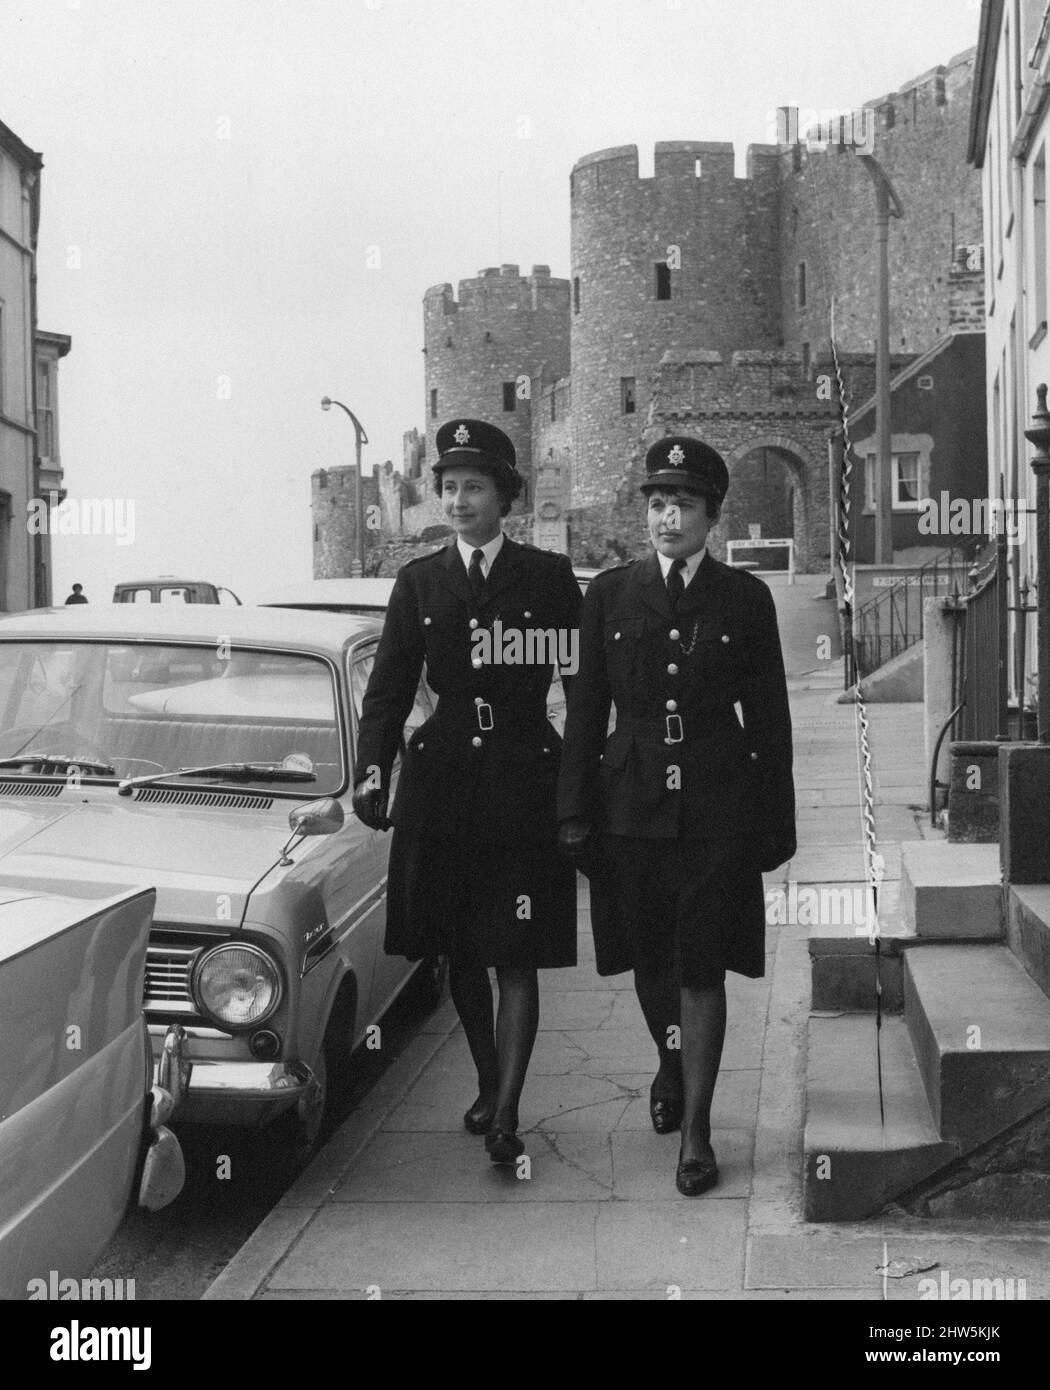 Women Police Officers, Pembrokeshire, West Wales, 18th April 1967.  June Roch (right) aged 31 from Bellevue Terrace, Pembroke Dock, and her friend and next door neighbour Ena Davies aged 35, are the only women special constables in South Pembrokeshire.   Pictured, on patrol with Pembroke Castle in background. Stock Photo